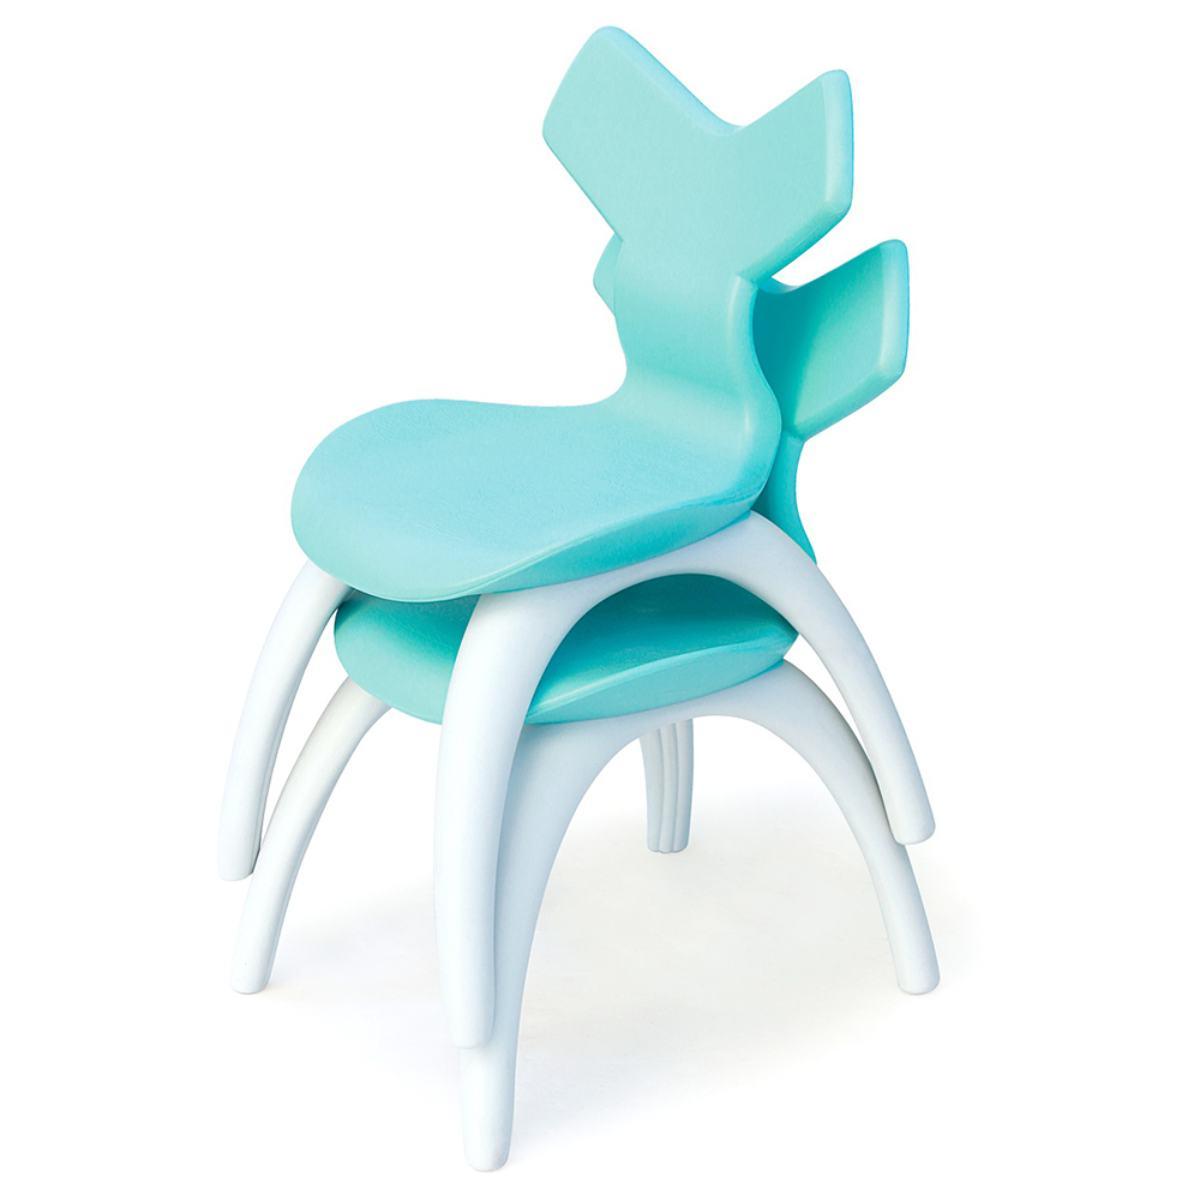 Ching Ching -Baby, toodler Chair (10 Orange/10 Green/10 Blue) - Assorted color